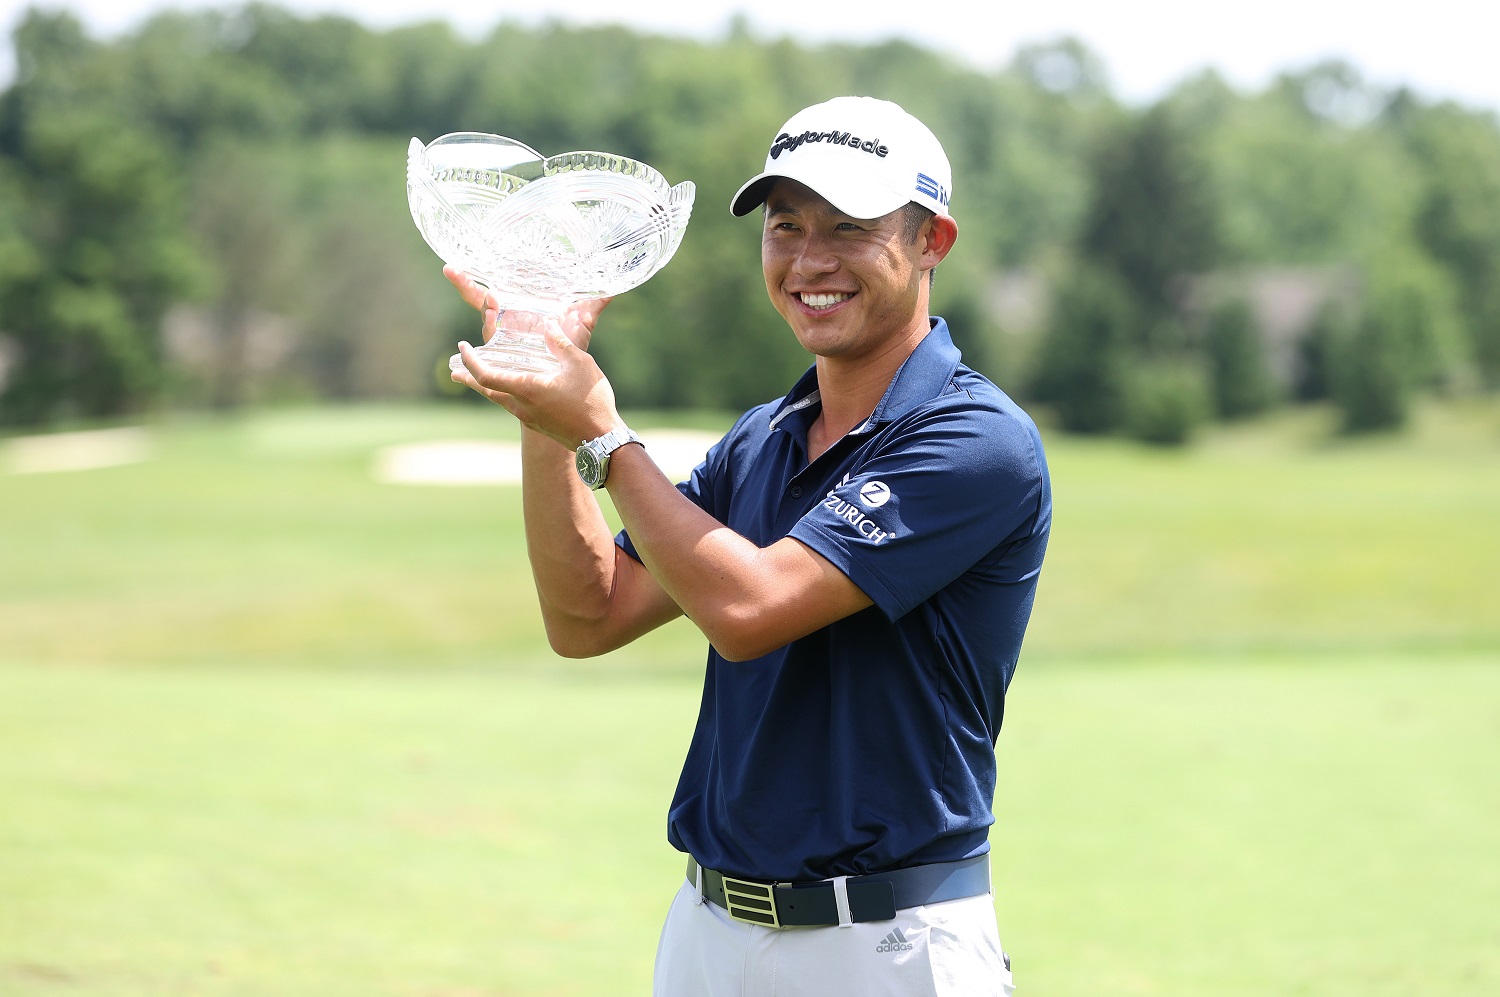 With His Win at Muirfield, Collin Morikawa Did Something That Only Tiger Woods Has Done in PGA Tour History